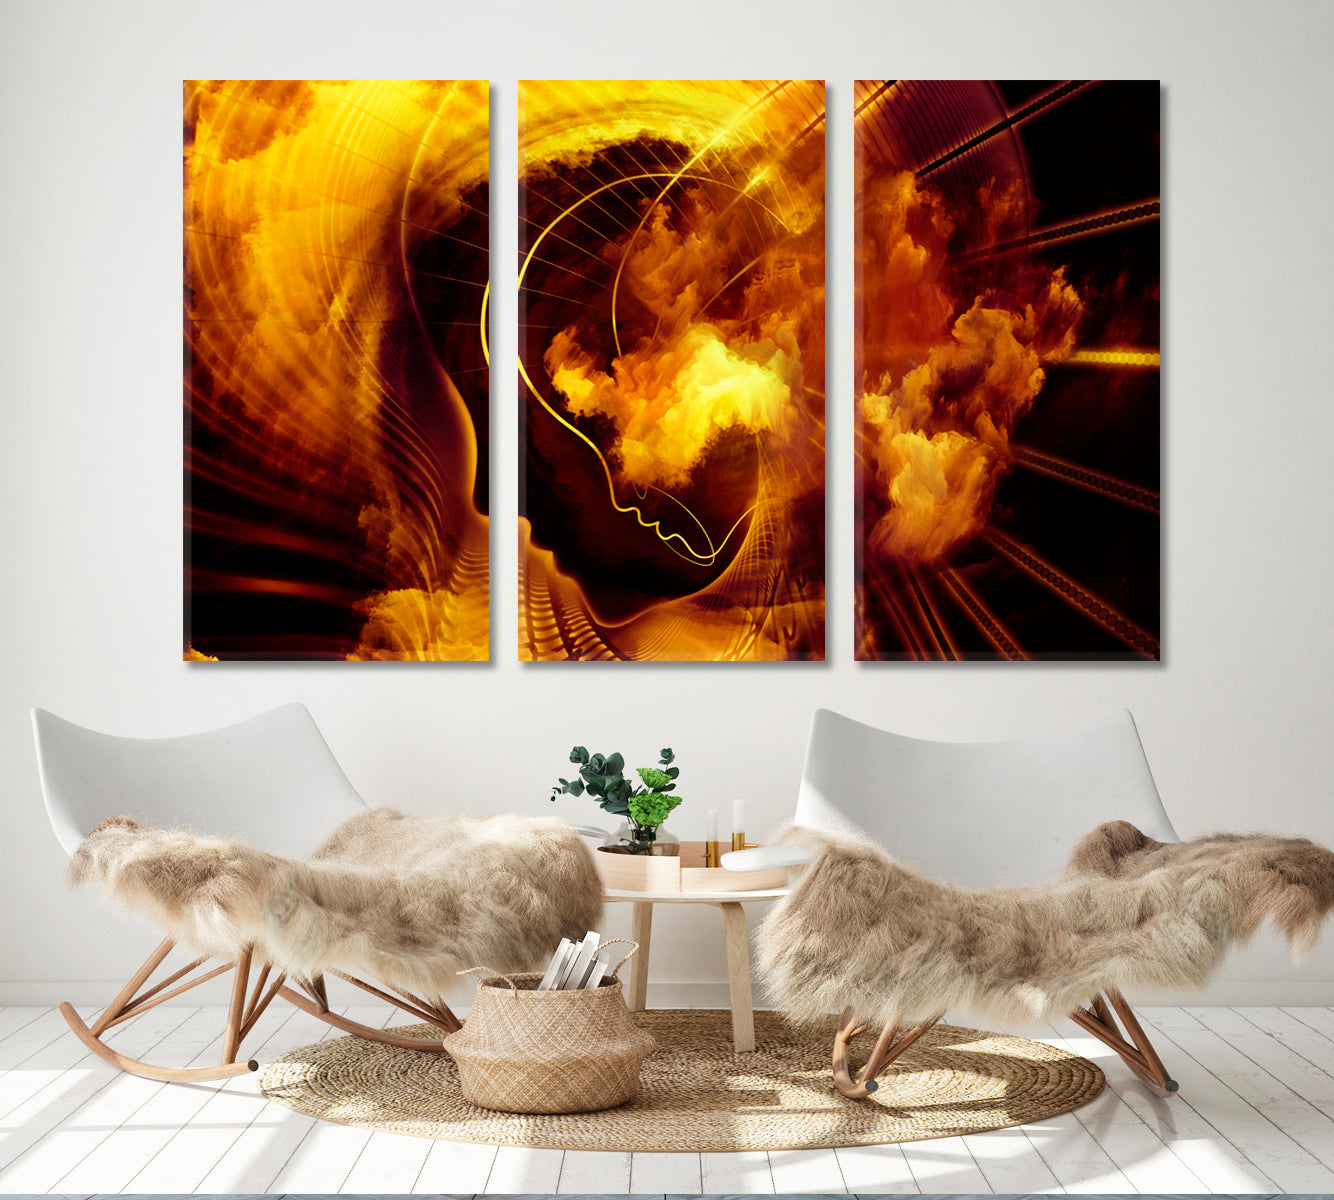 Abstract Fractal Forms Imagination Consciousness Art Artesty 3 panels 36" x 24" 